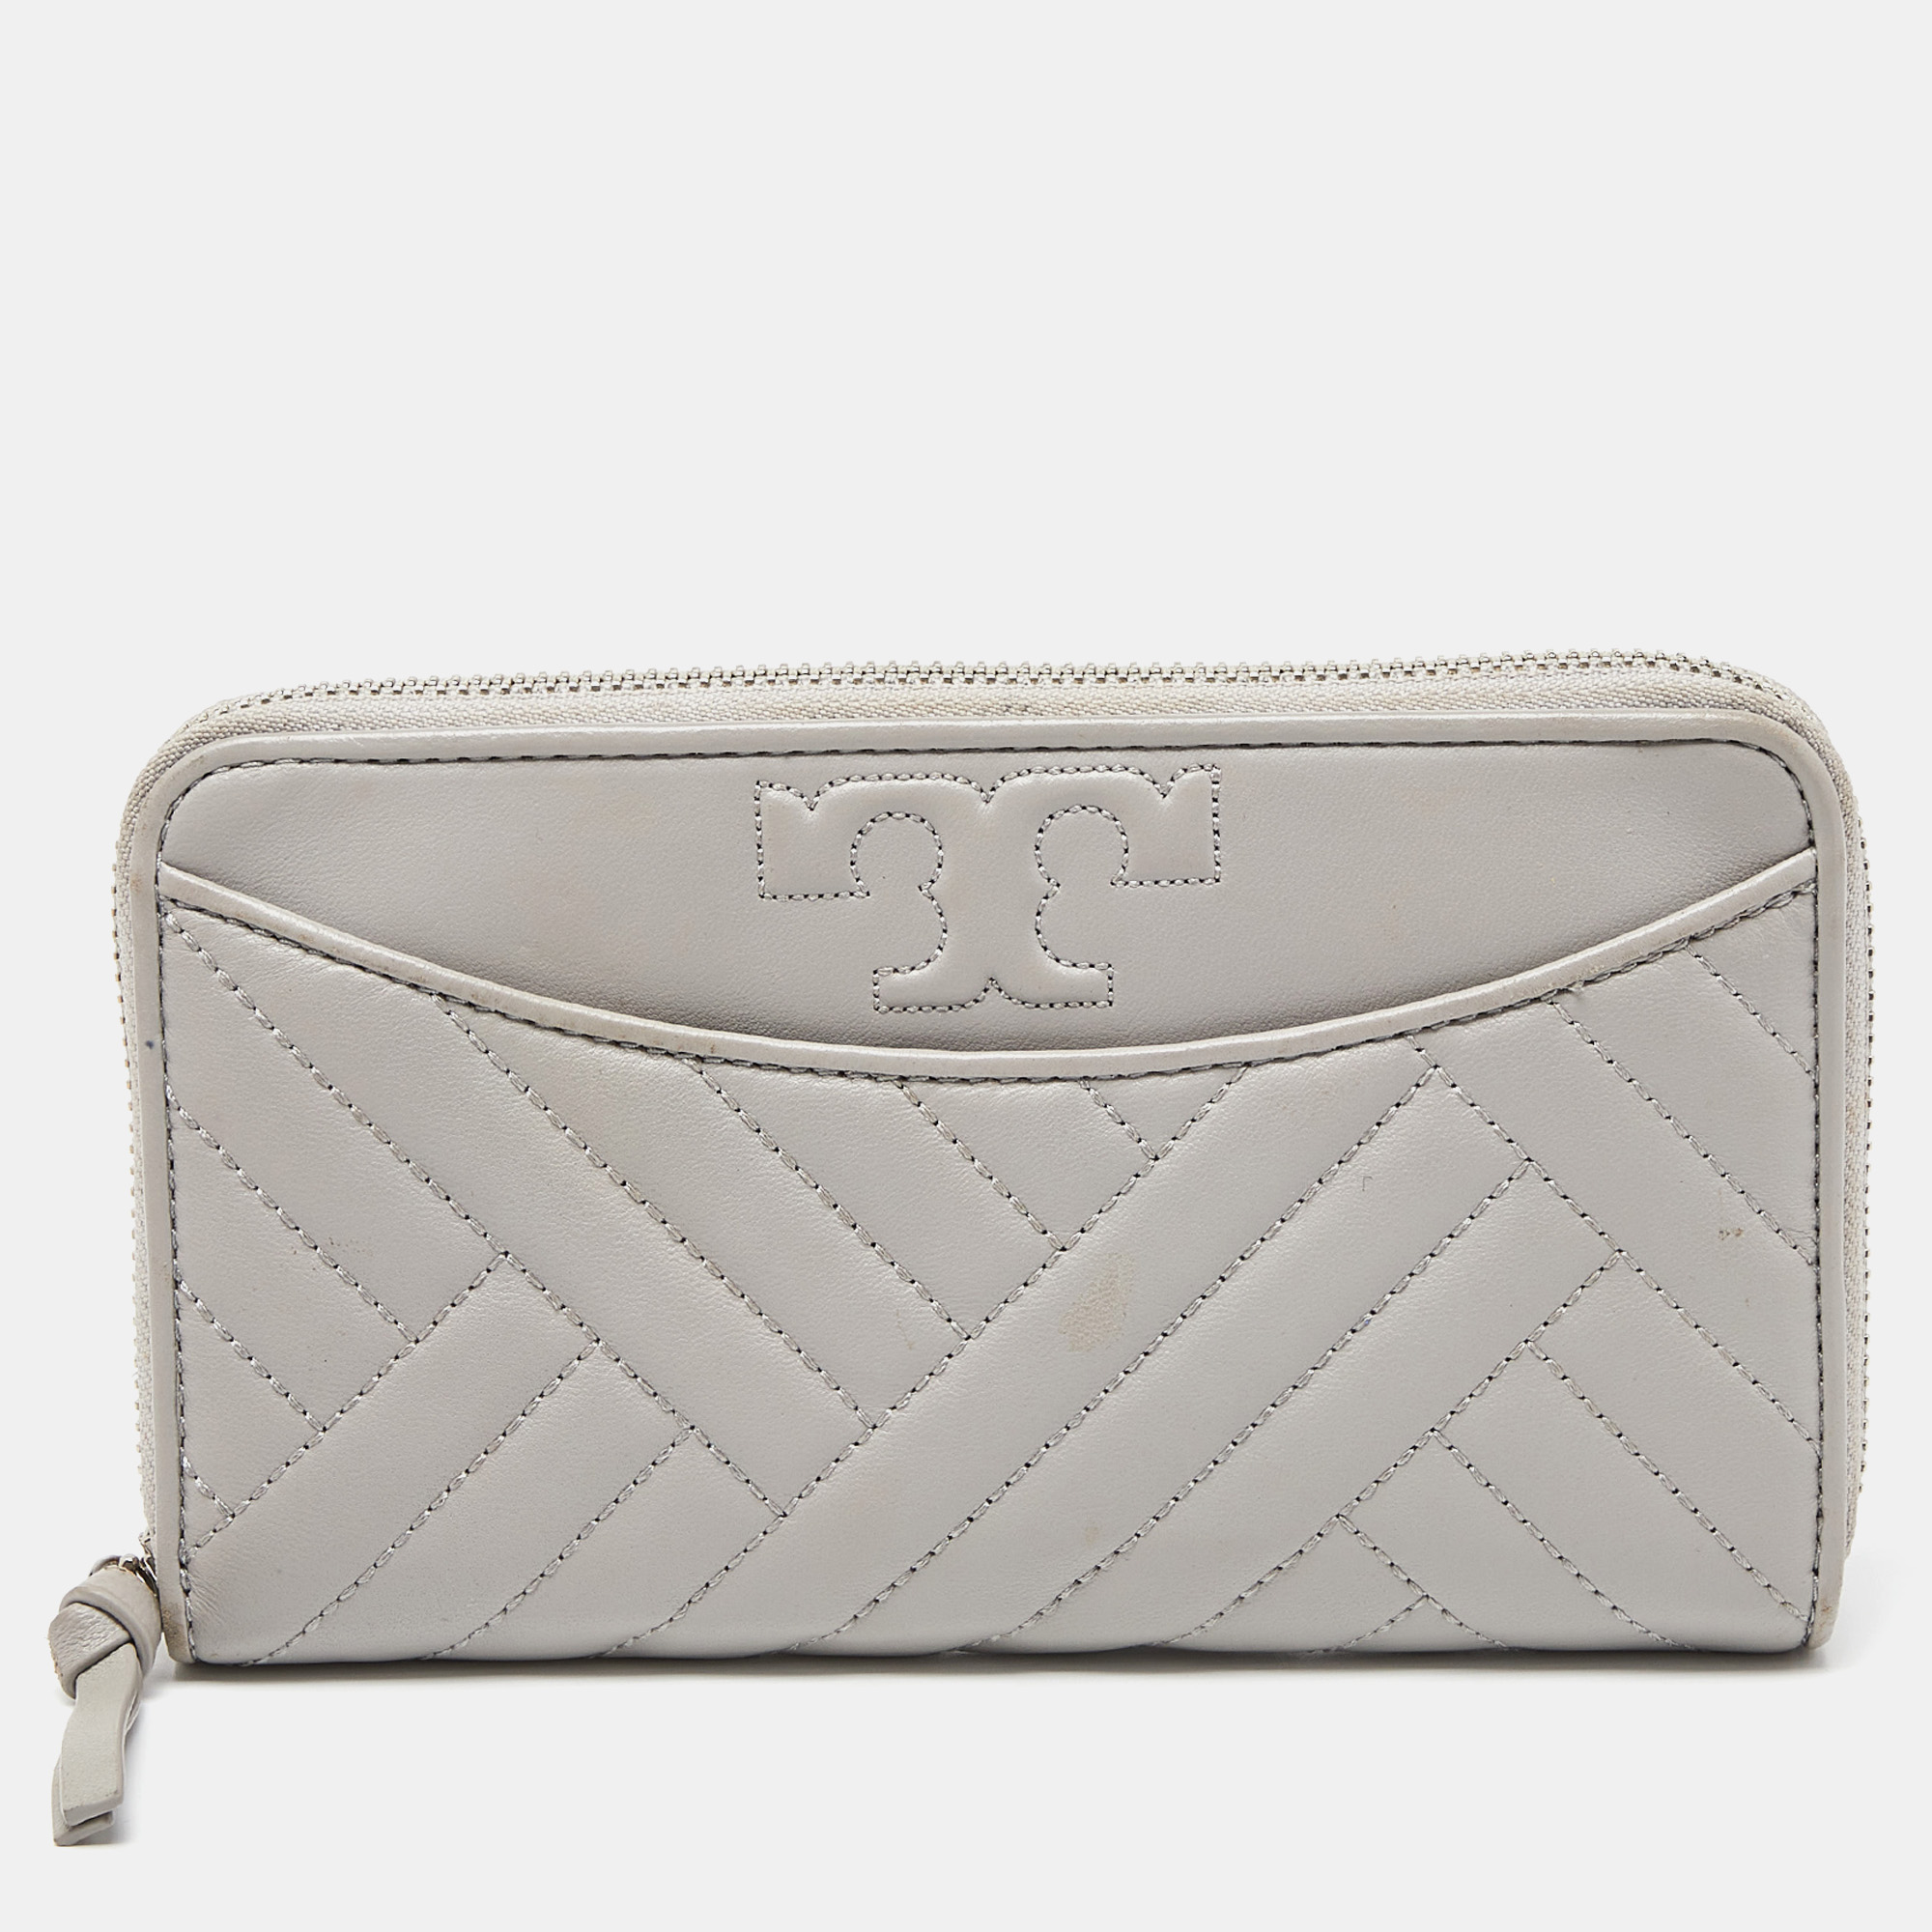 Pre-owned Tory Burch Grey Leather Alexa Continental Wallet